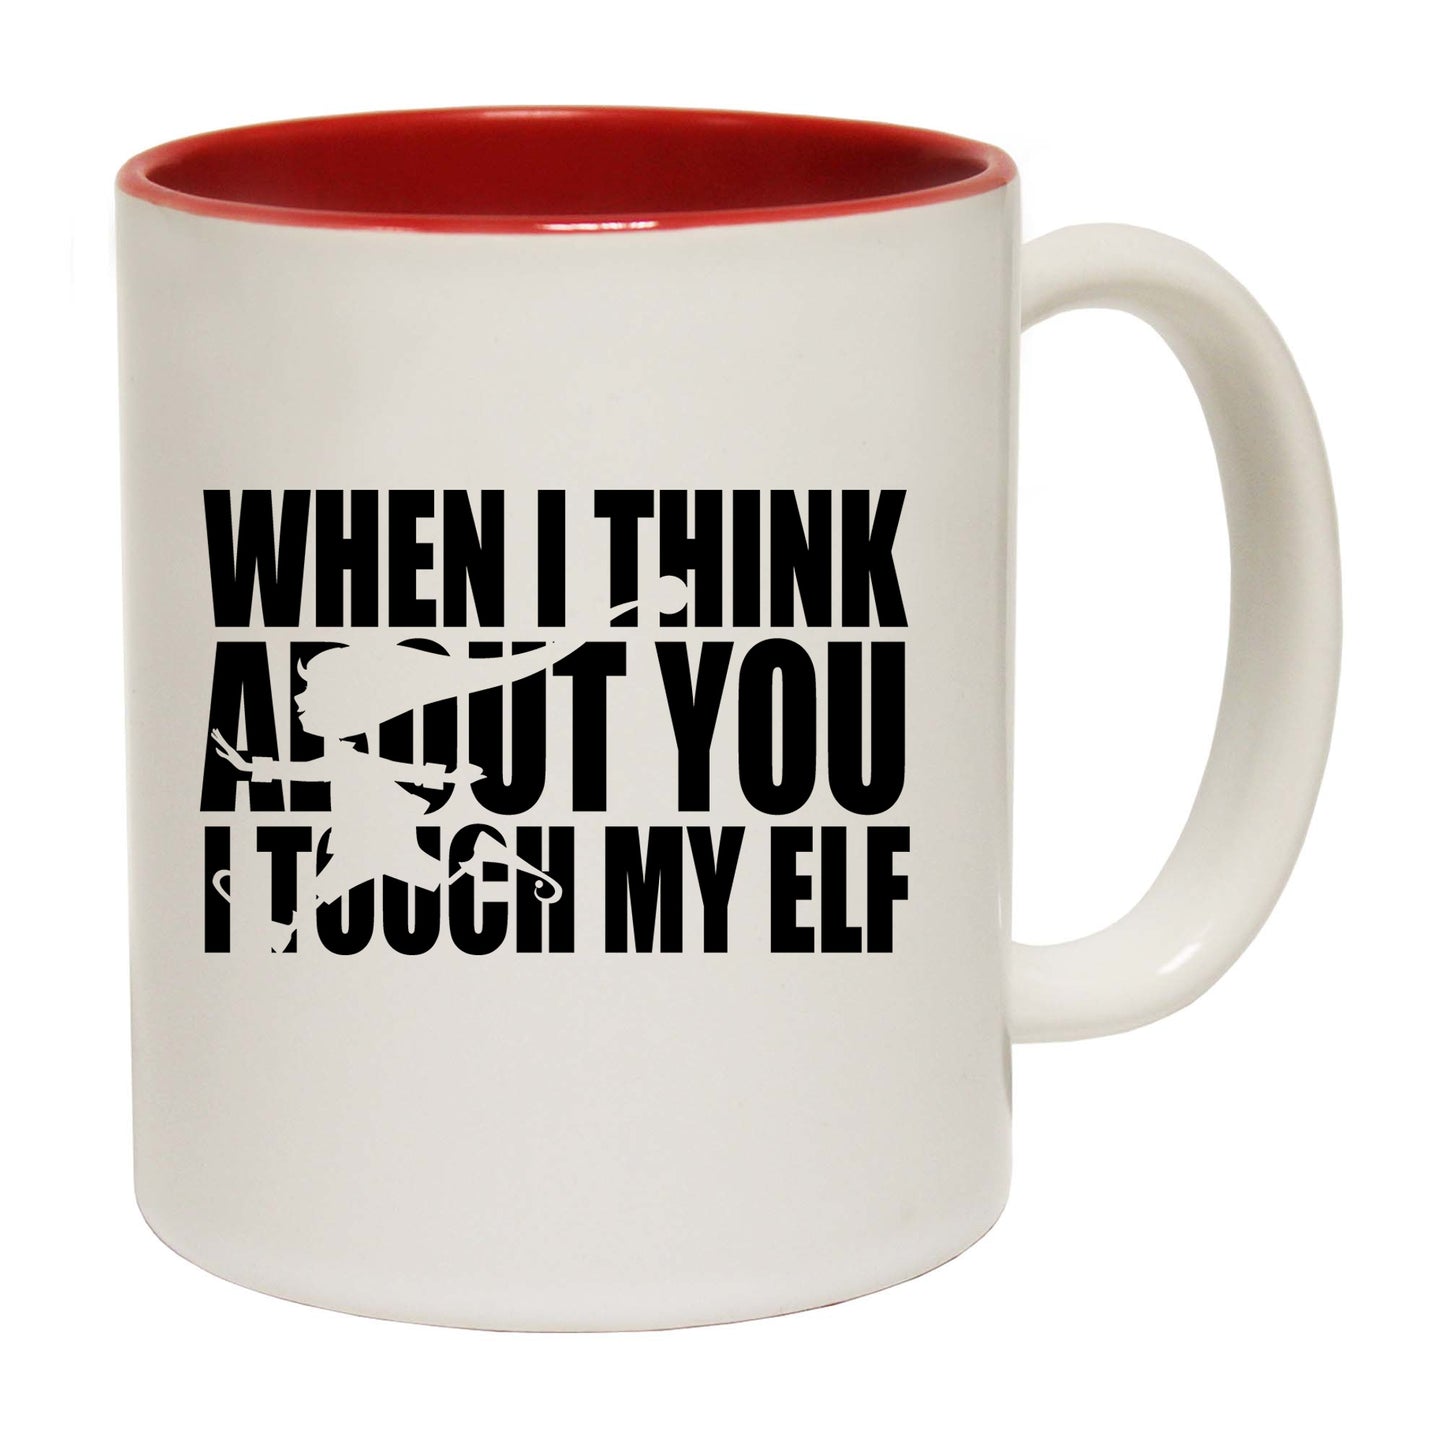 The Christmas Hub - Christmas When I Think About You I Touch My Elf - Funny Coffee Mug